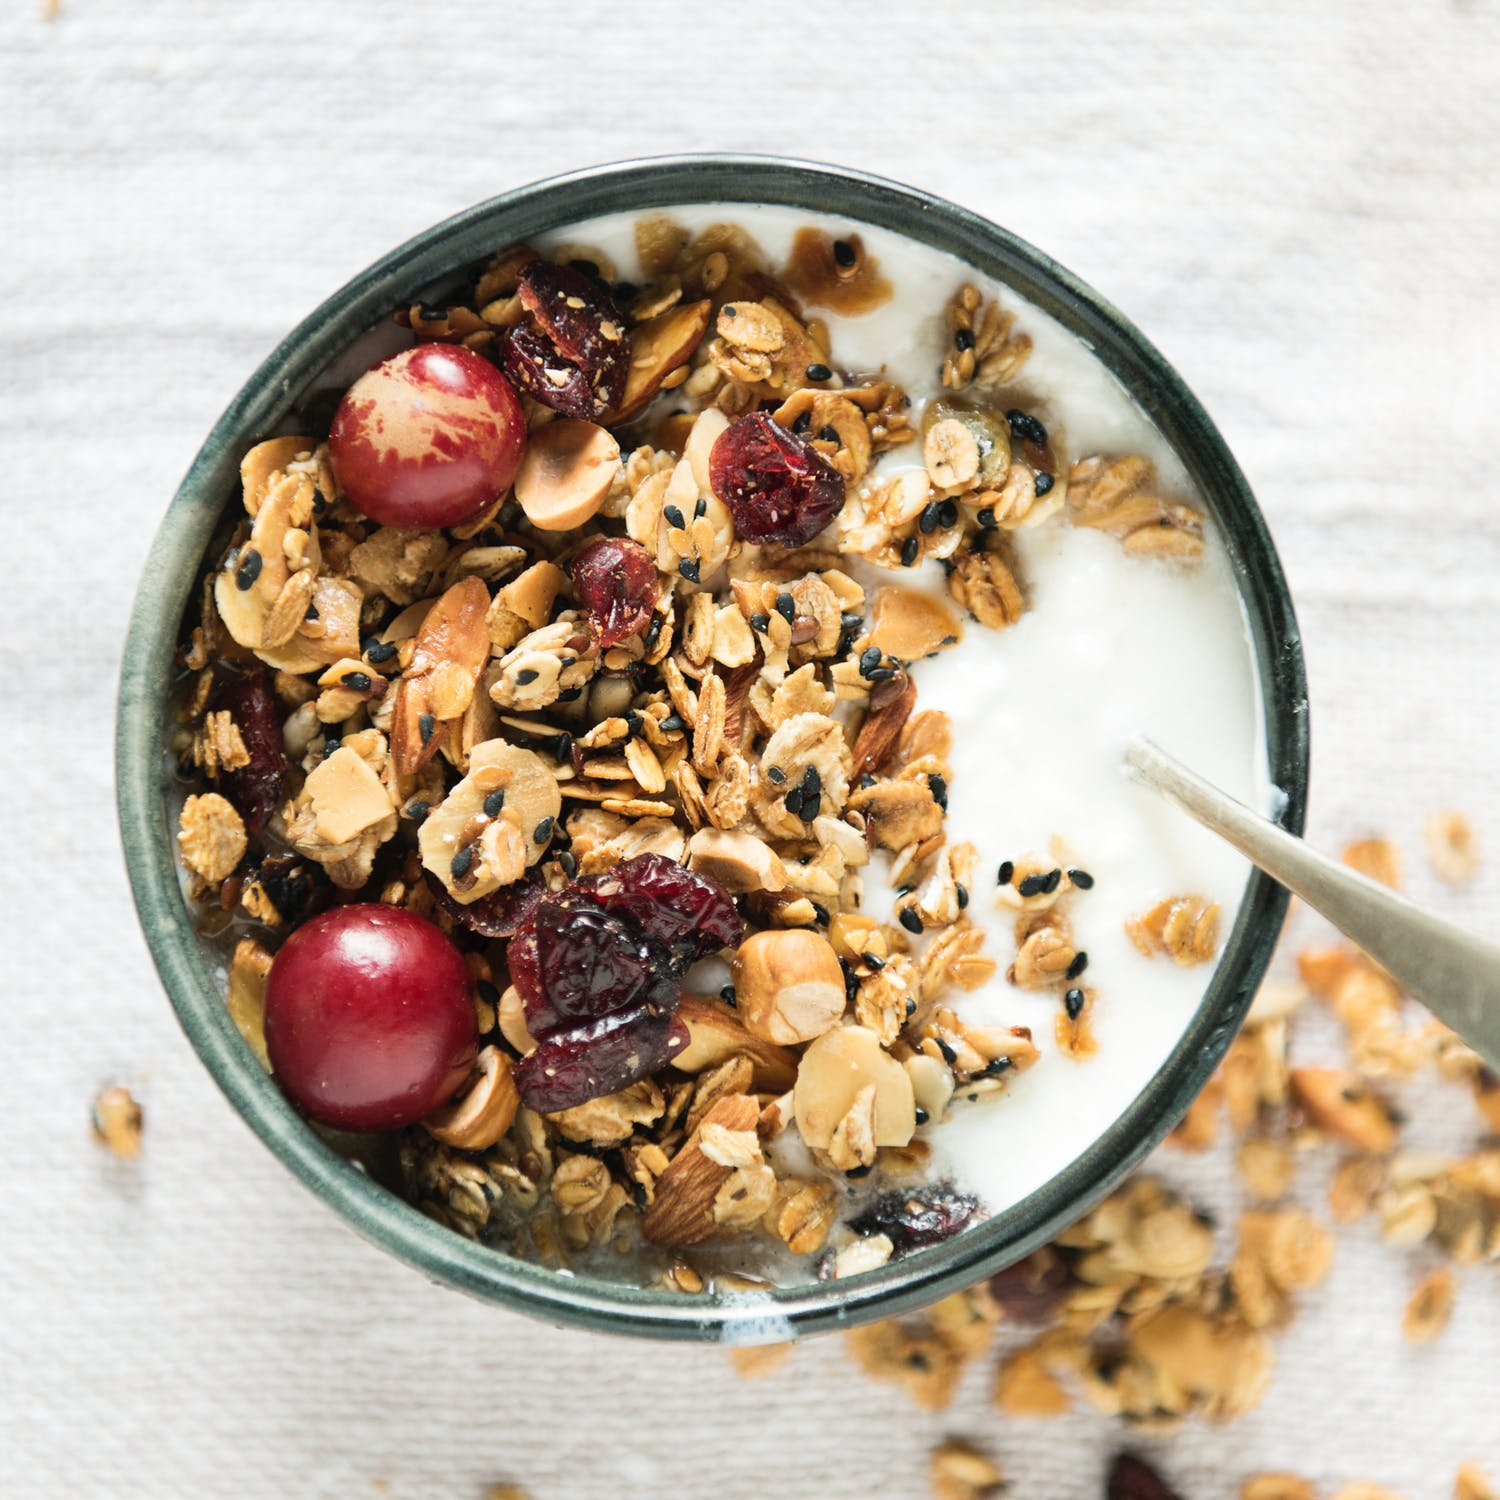 Yogurt with oats, nuts, and berries